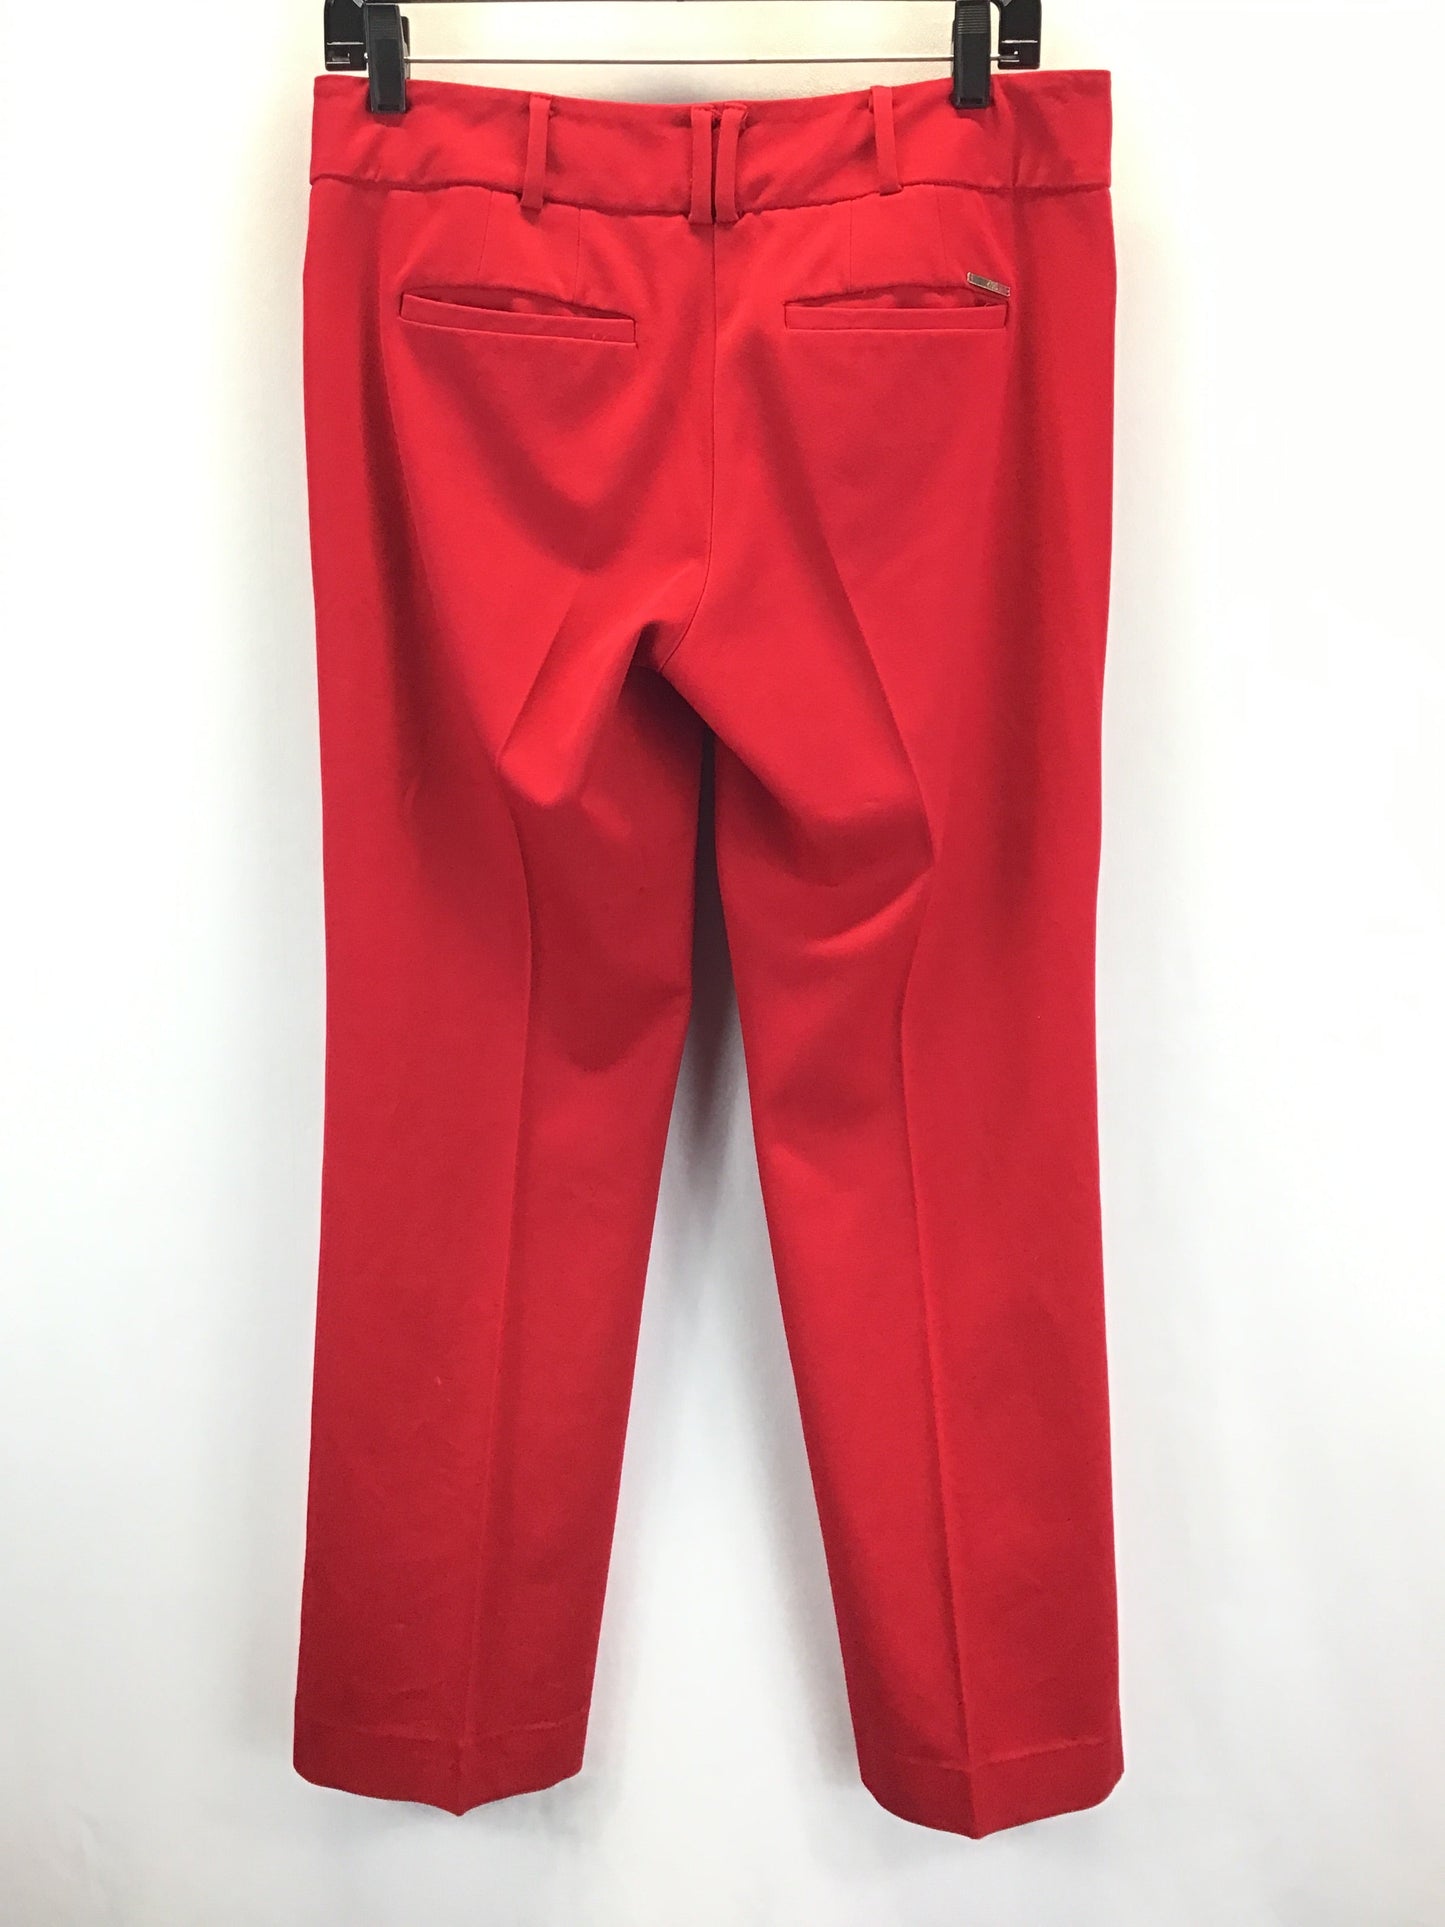 Red Pants Dress New York And Co, Size 4